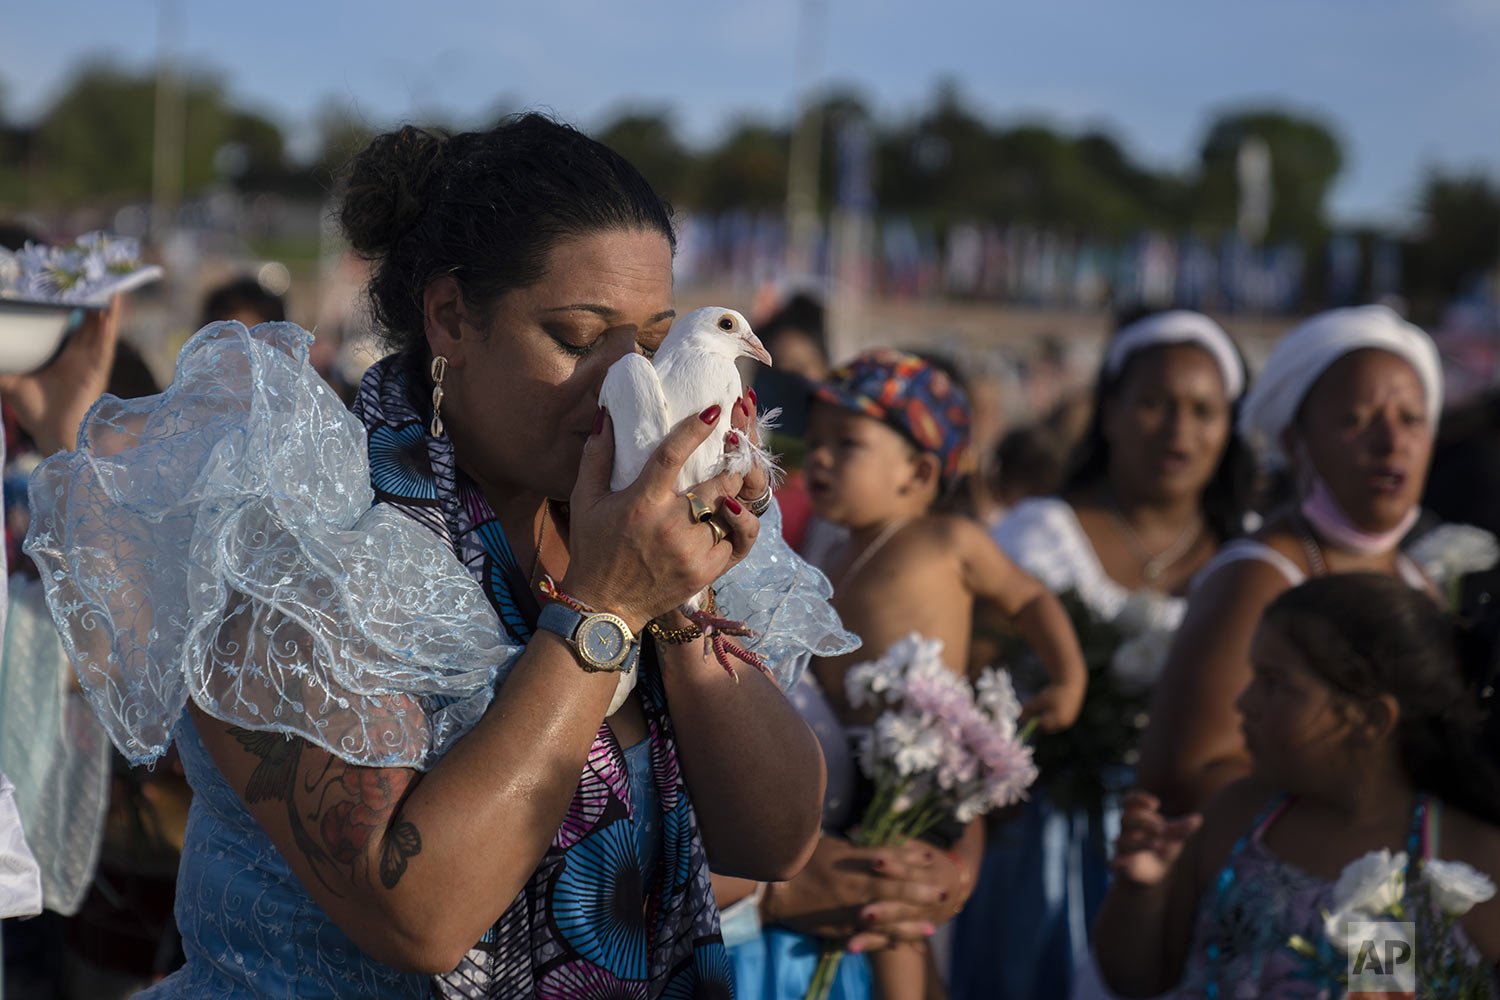  A woman kisses a pigeon during a ritual for the African sea goddess Yemanja on the beach in Montevideo, Uruguay, Feb. 2, 2022. Worshippers gather at the beach on her feast day, bringing candles, flowers, honey and fruit to honor her. (AP Photo/Matil